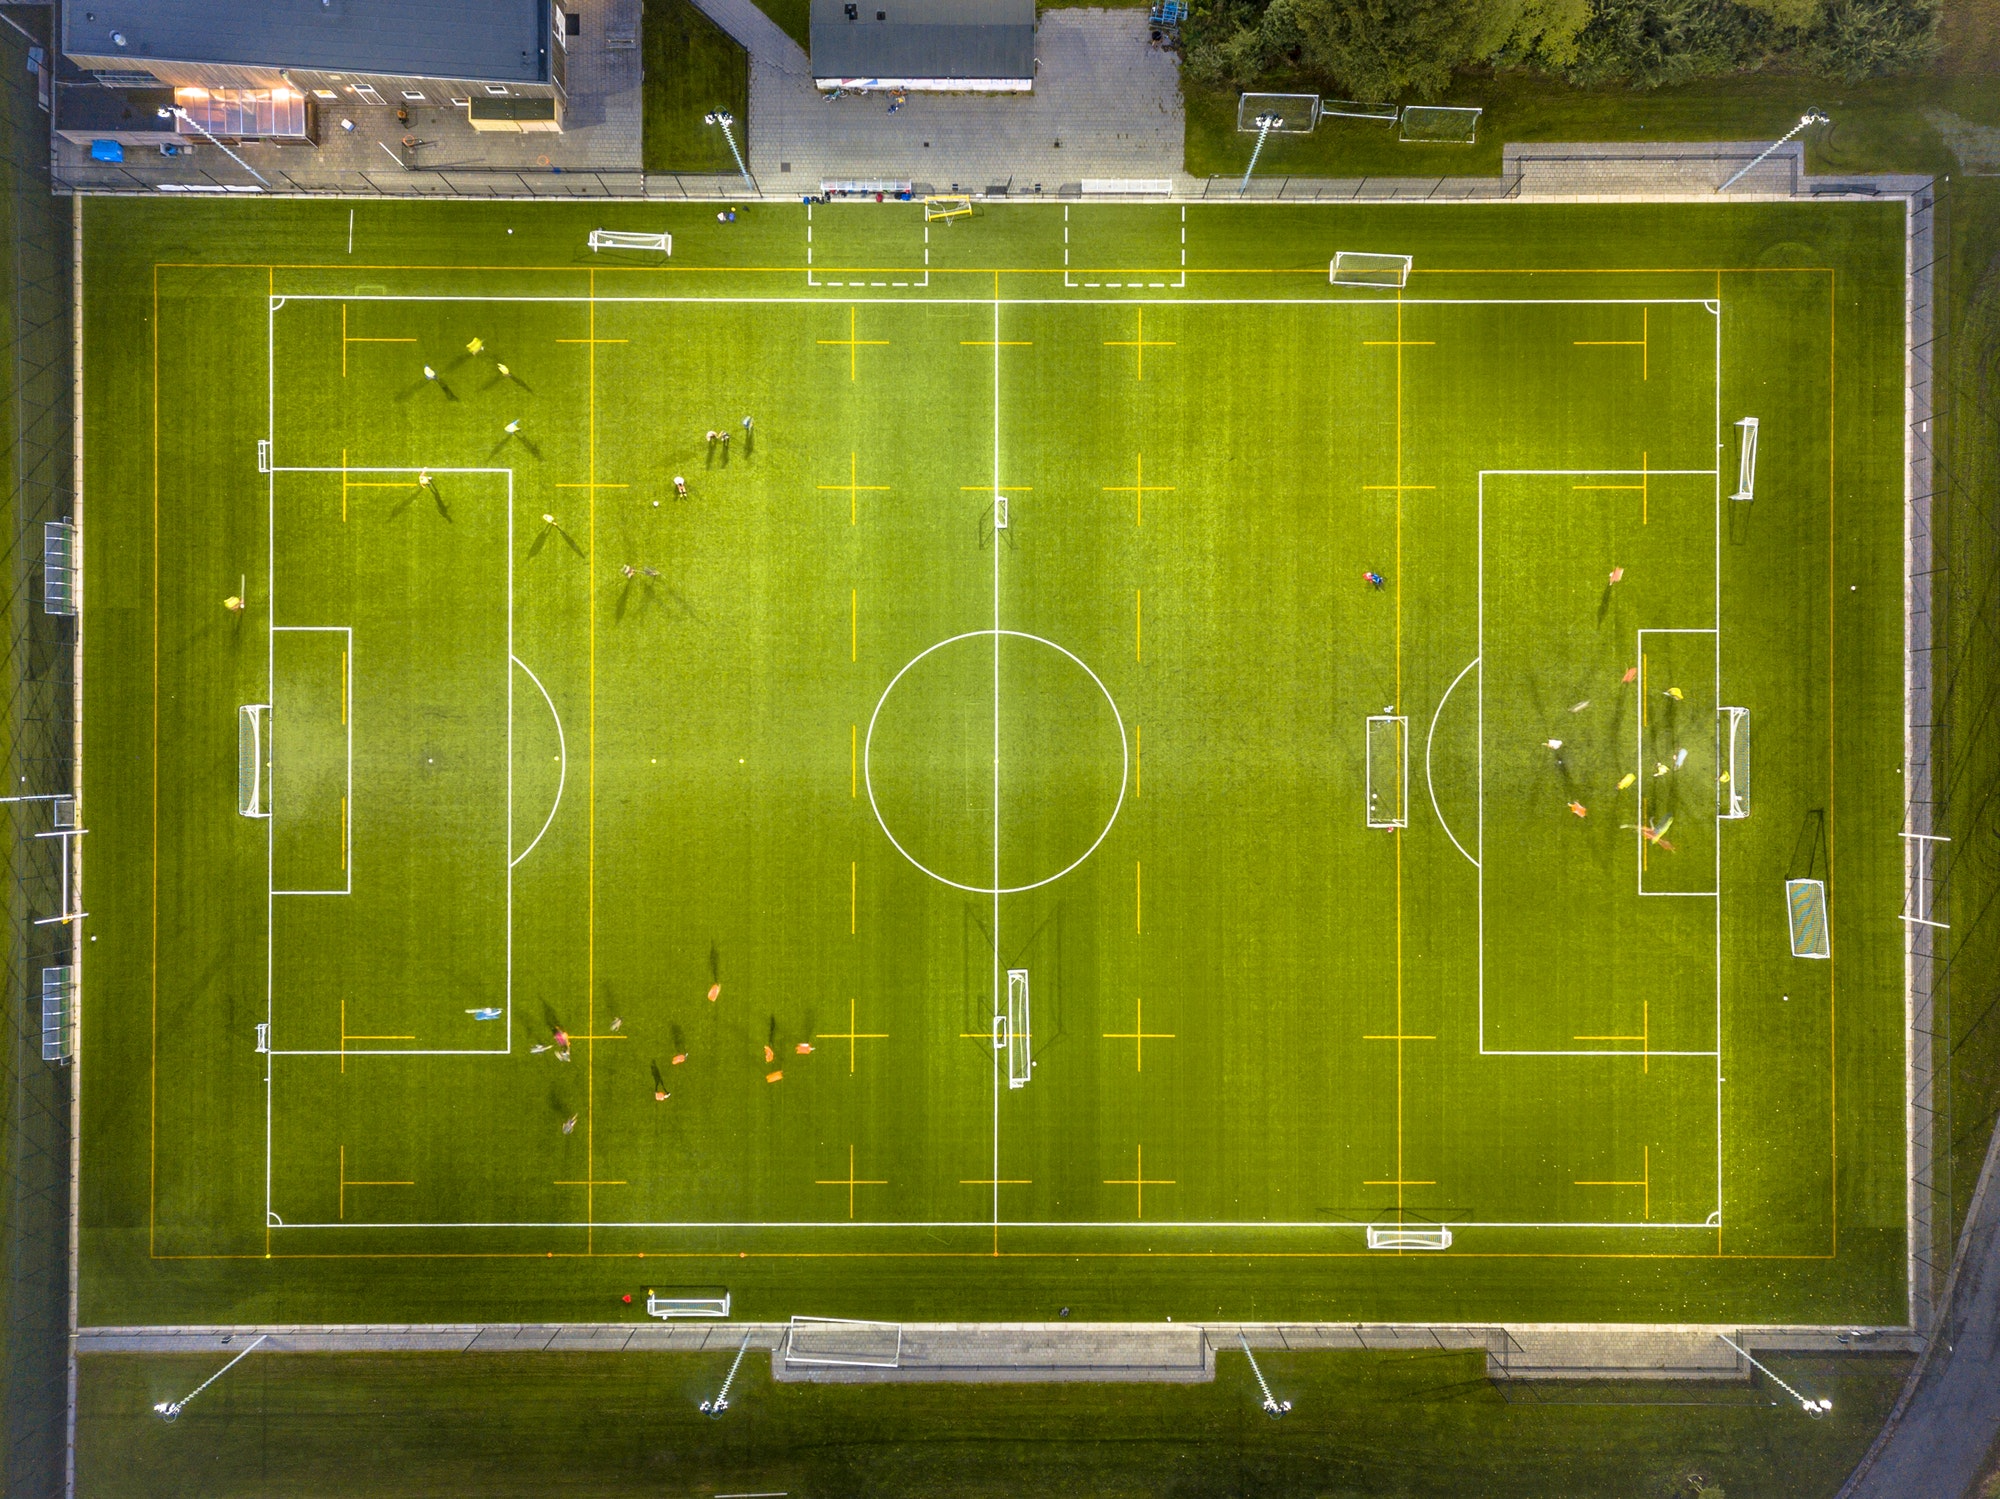 Aerial view of soccer field at night